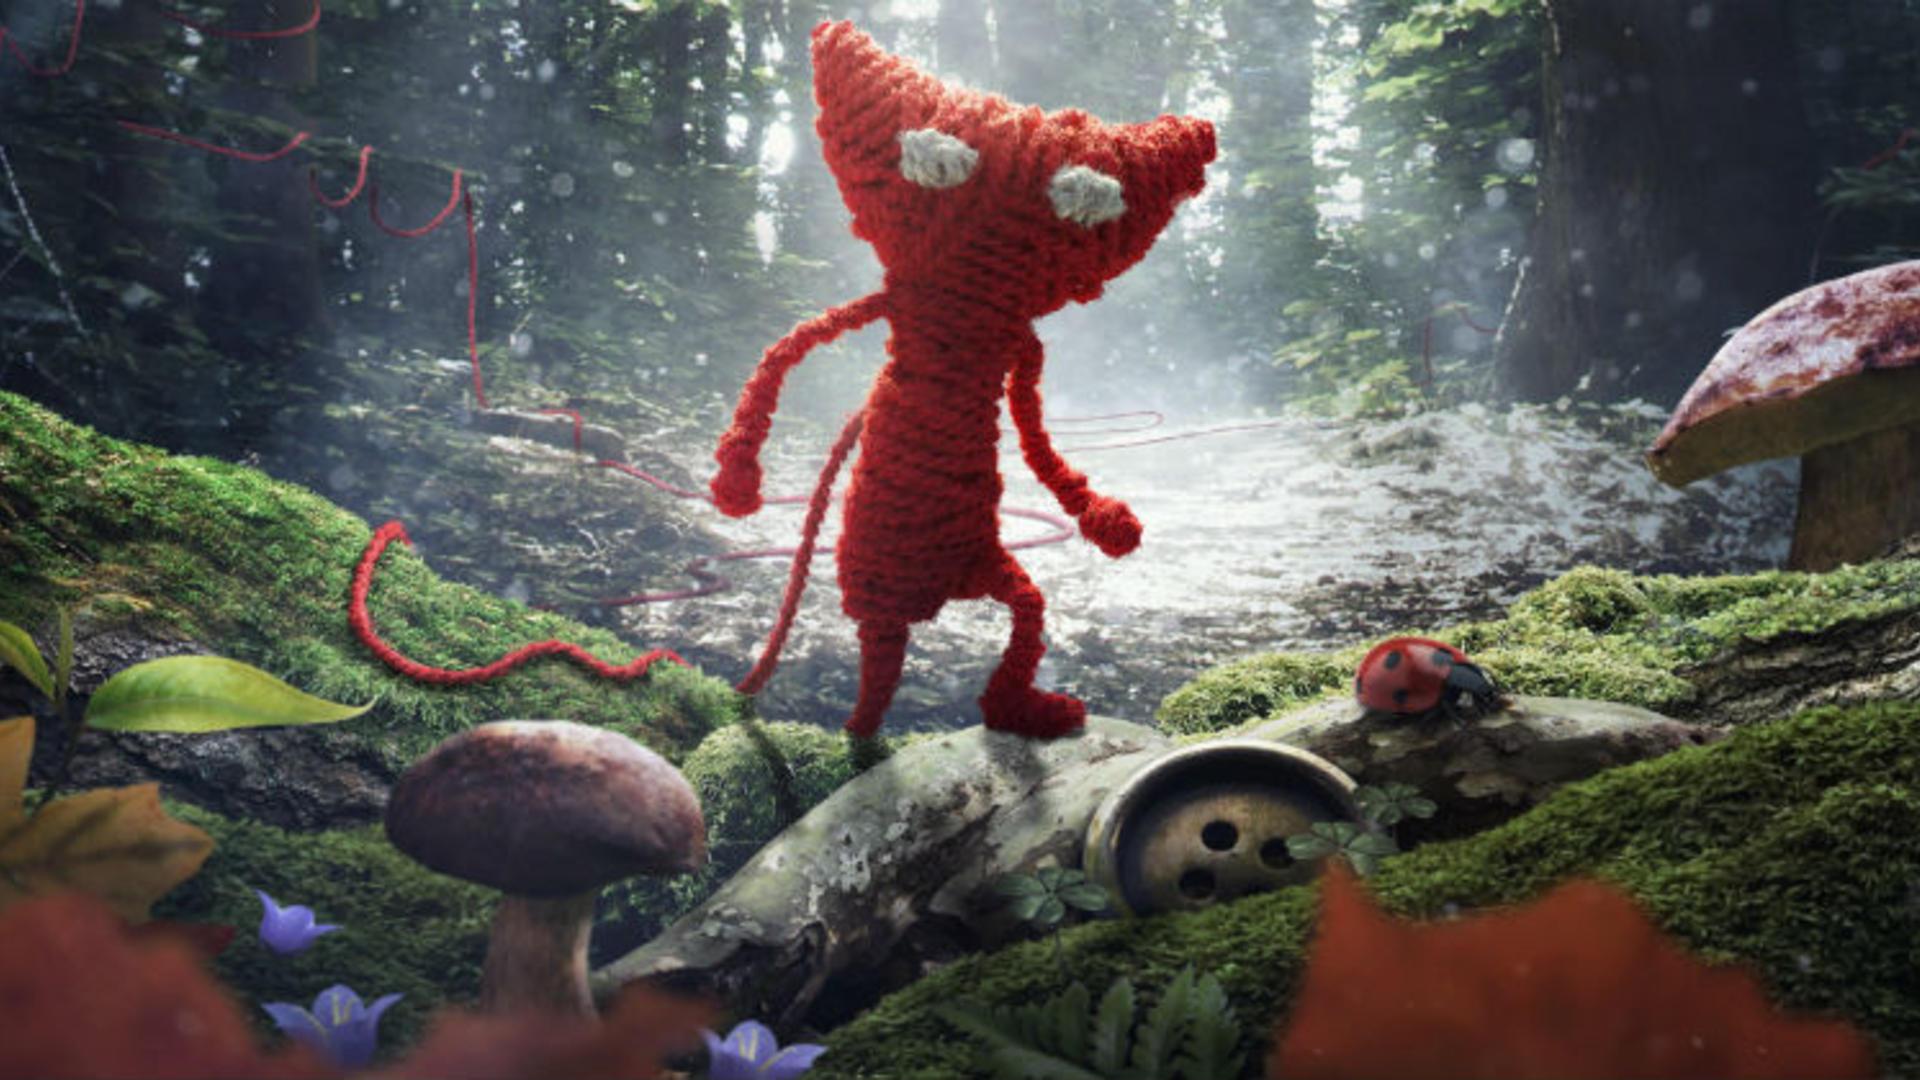 Unravel PlayStation 4 Review: A Real Yarn